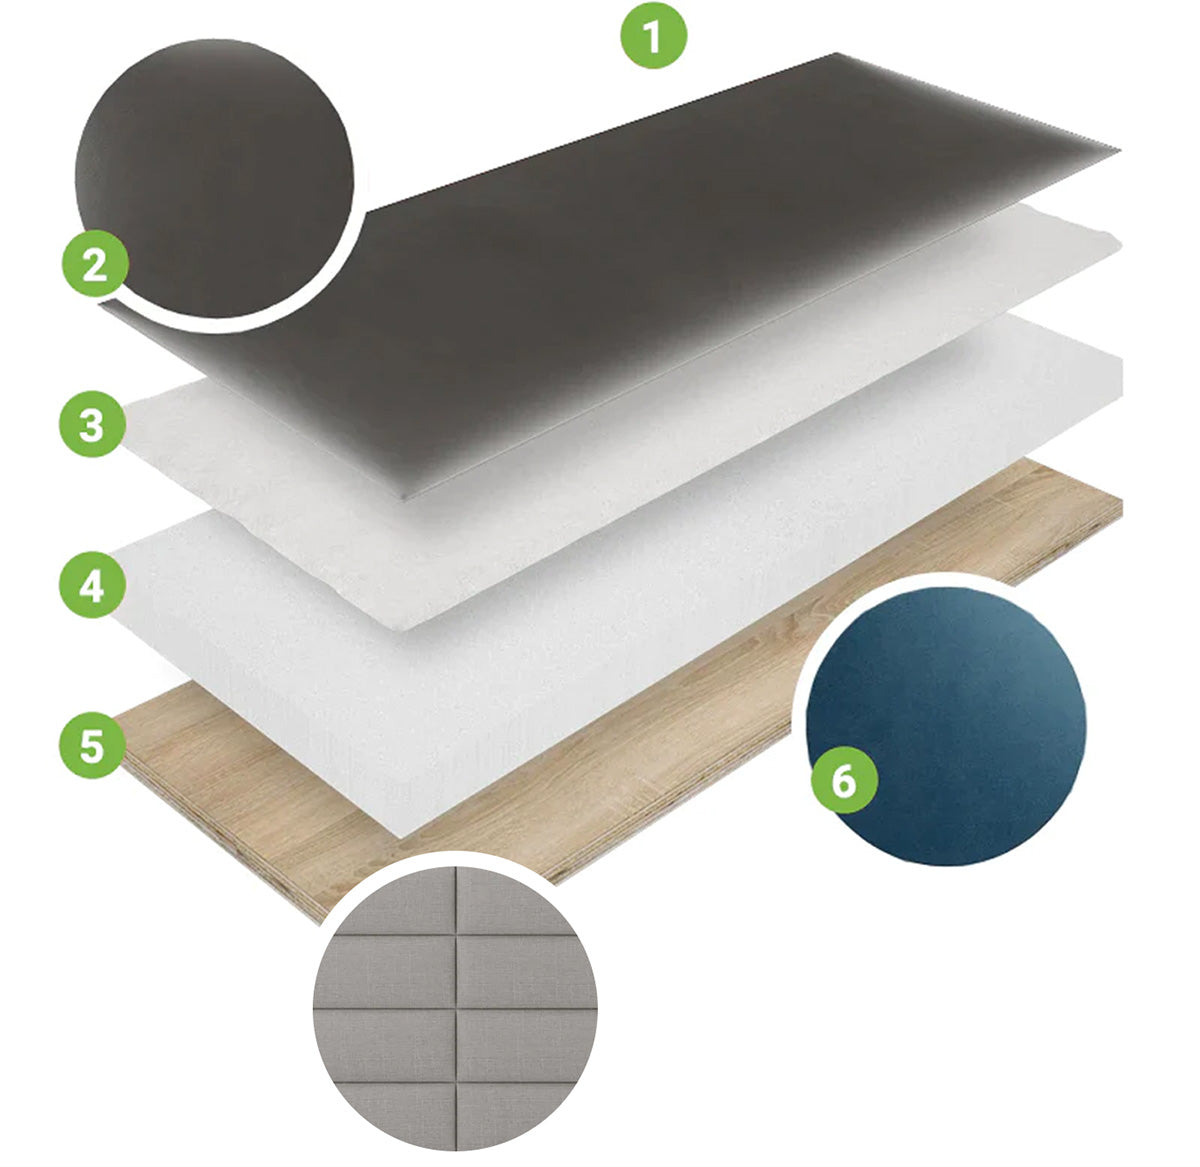 Upholstered wall treatments diagram